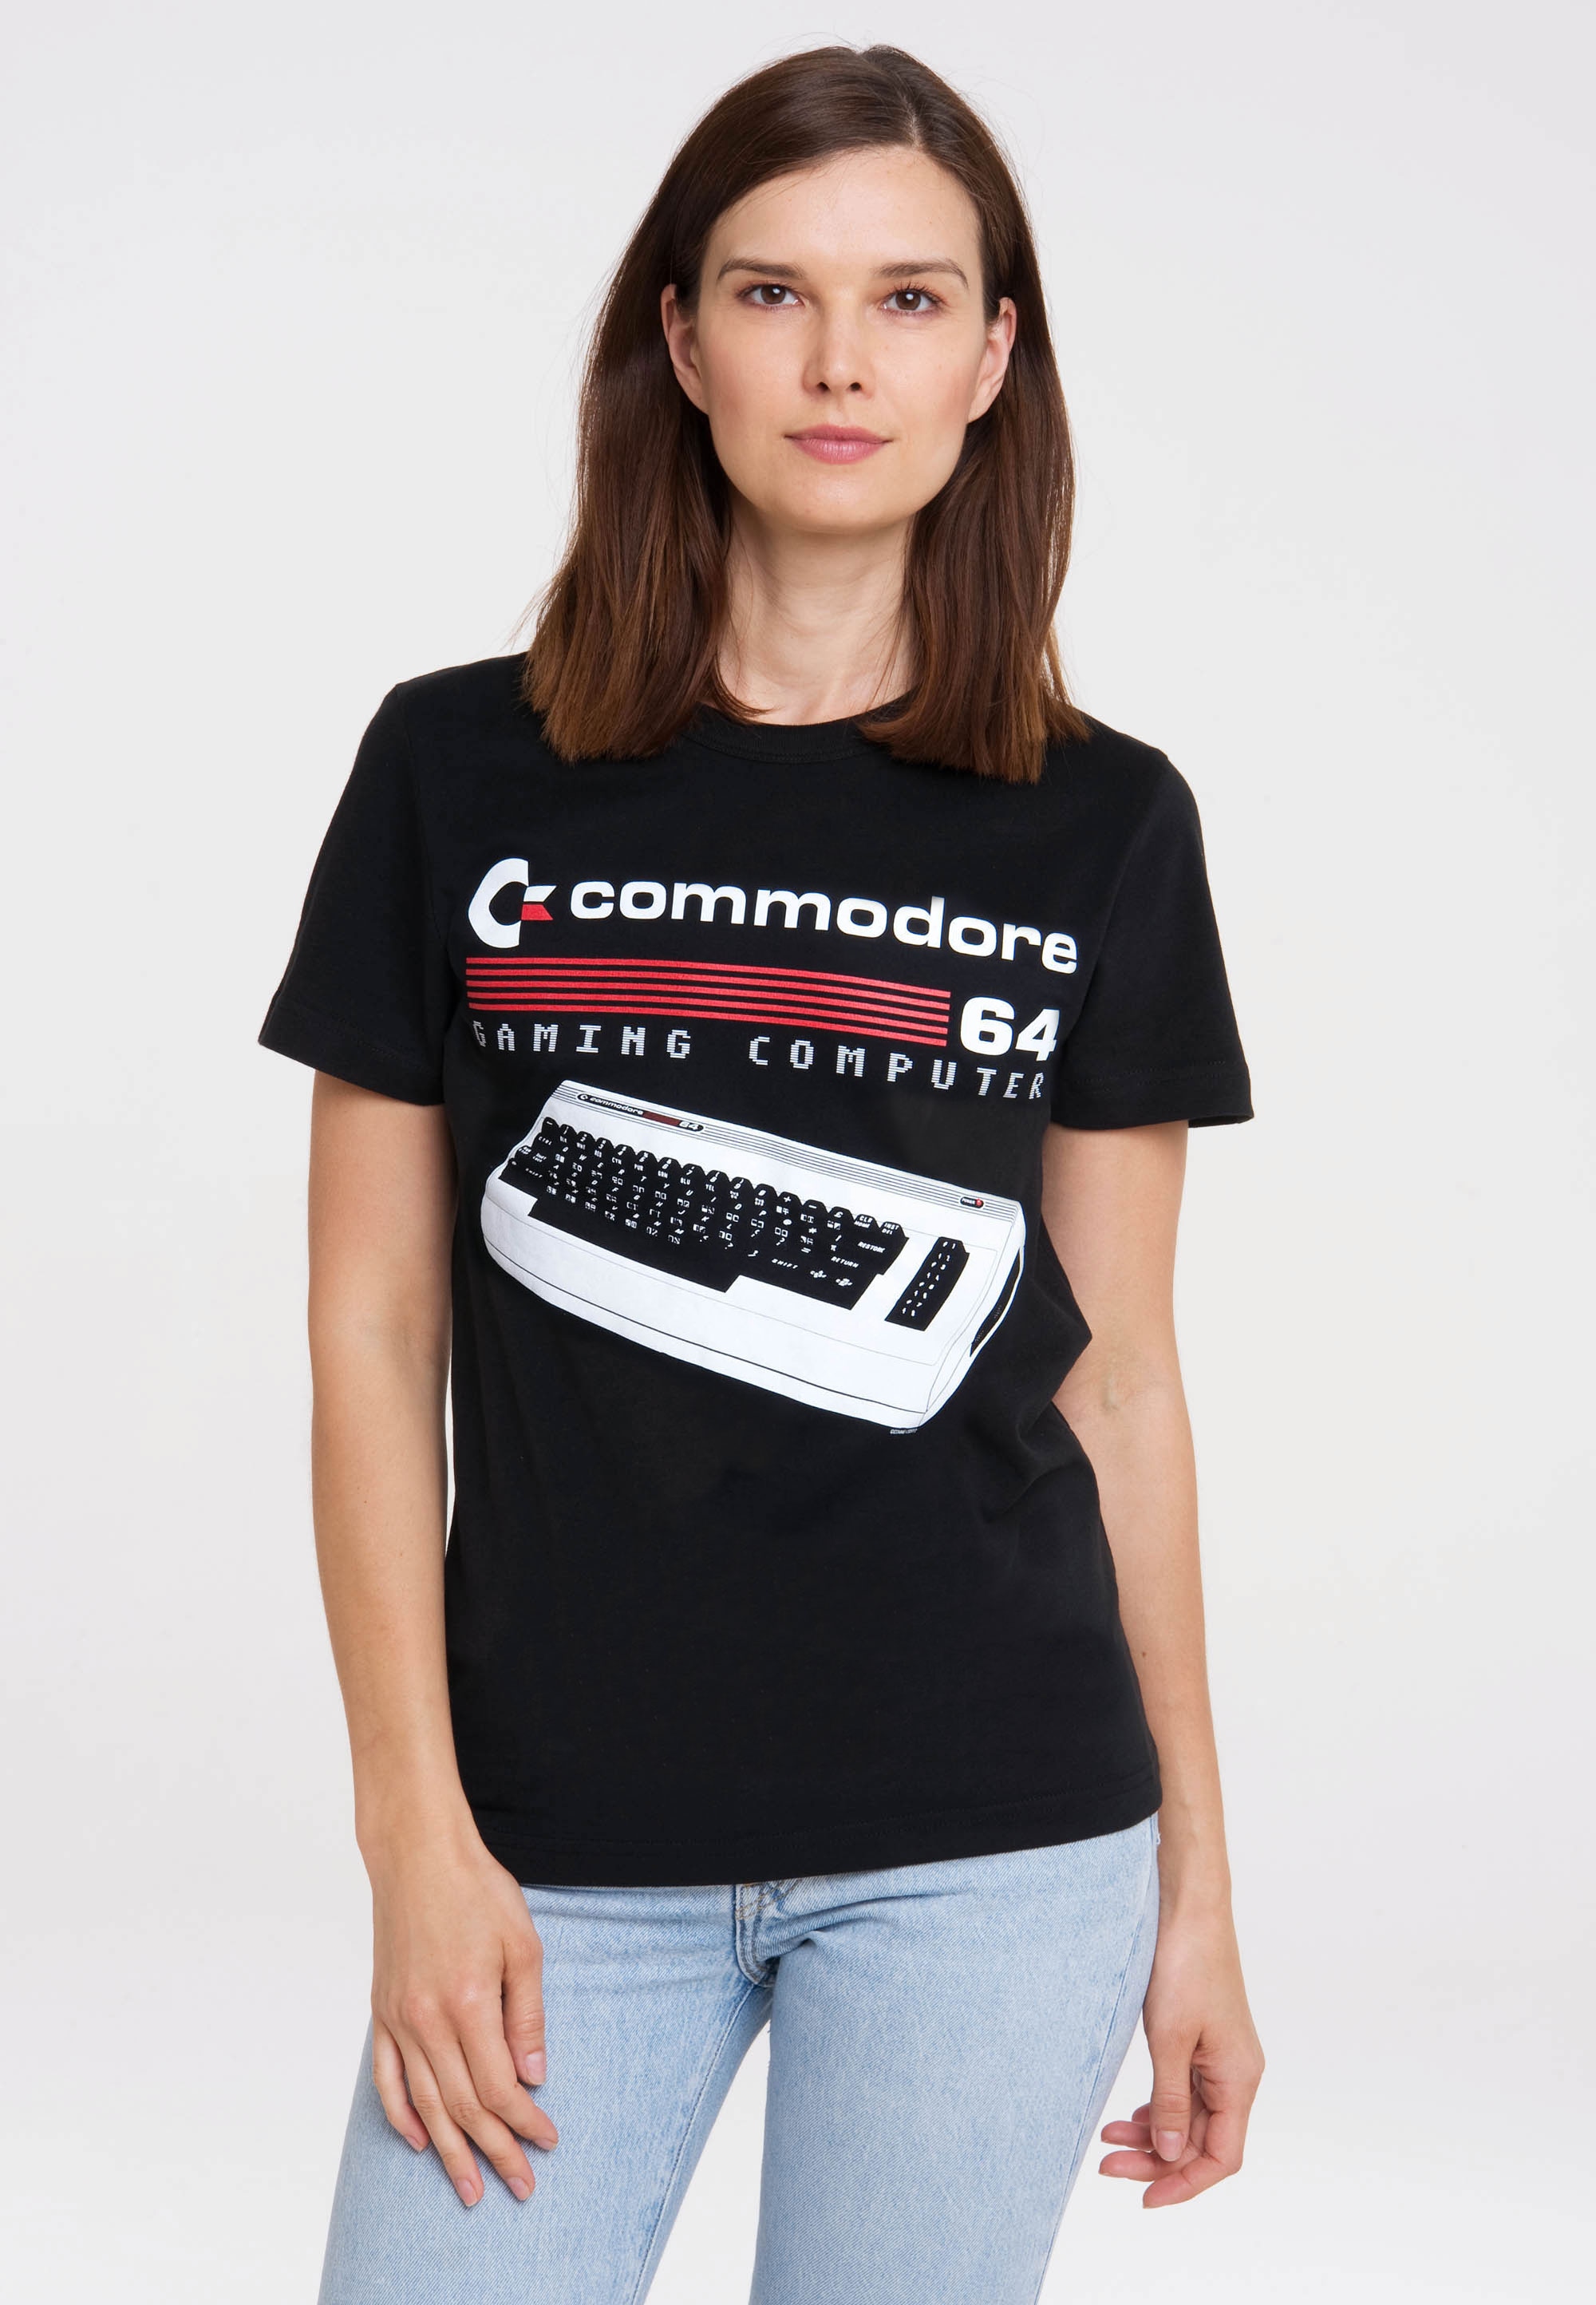 T-Shirt »Commodore - Gaming Computer«, mit coolem Print